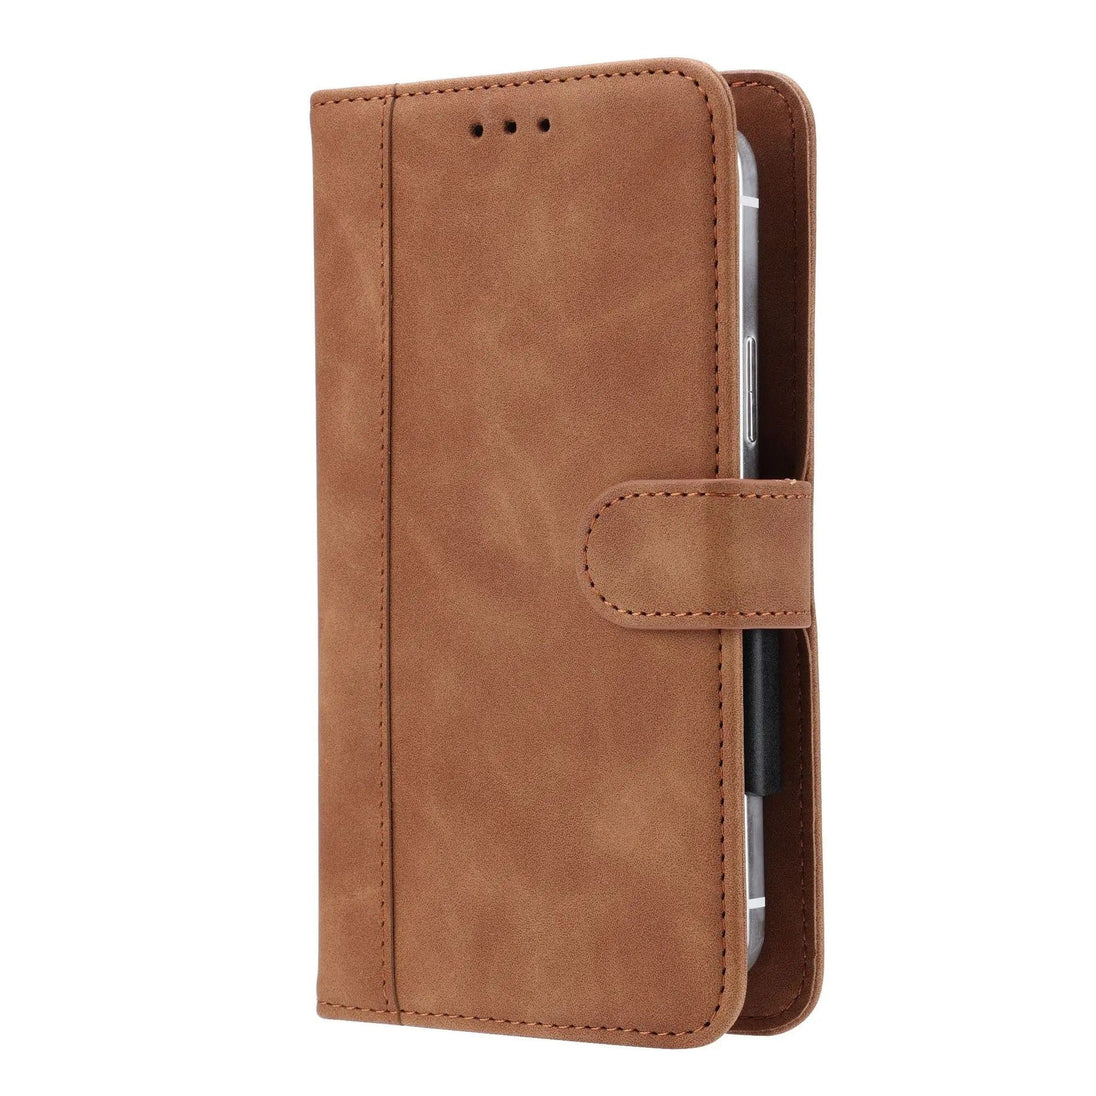 Secure Style Upgrade: Magnetic Flip Wallet with Credit Card Holder for Universal Smartphones